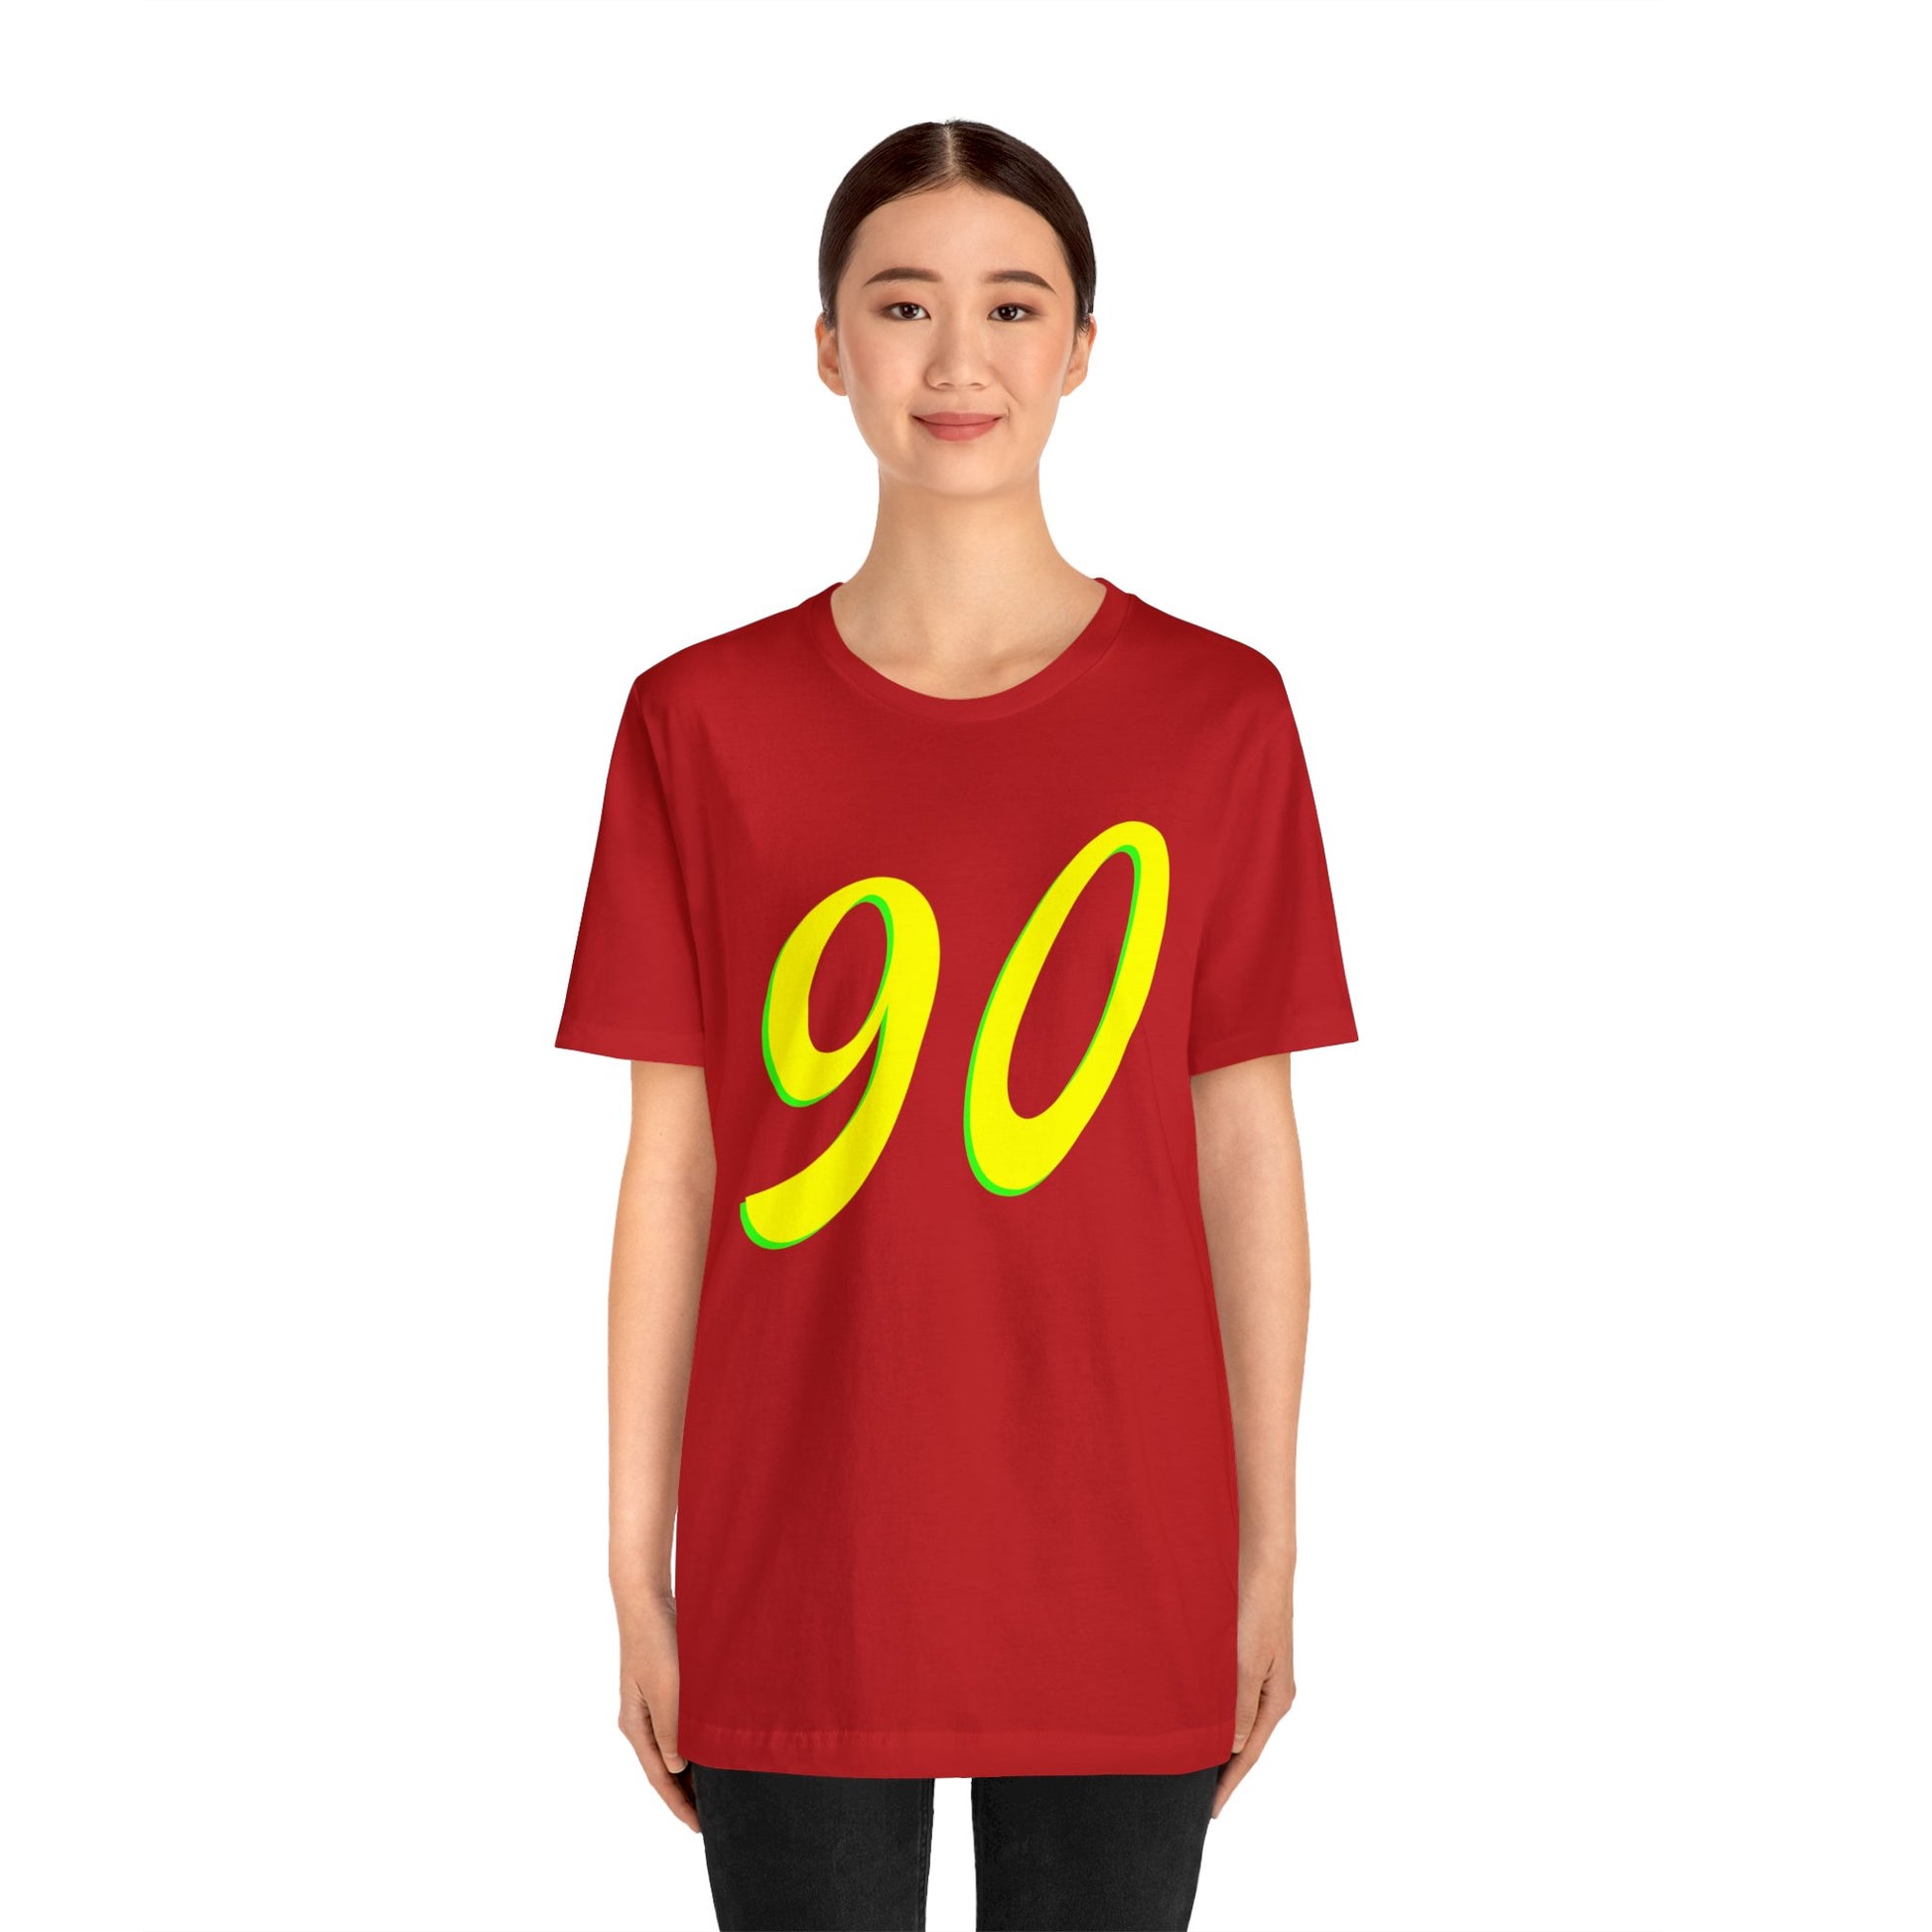 Number 90 Design - Soft Cotton Tee for birthdays and celebrations, Gift for friends and family, Multiple Options by clothezy.com in Asphalt Size Medium - Buy Now